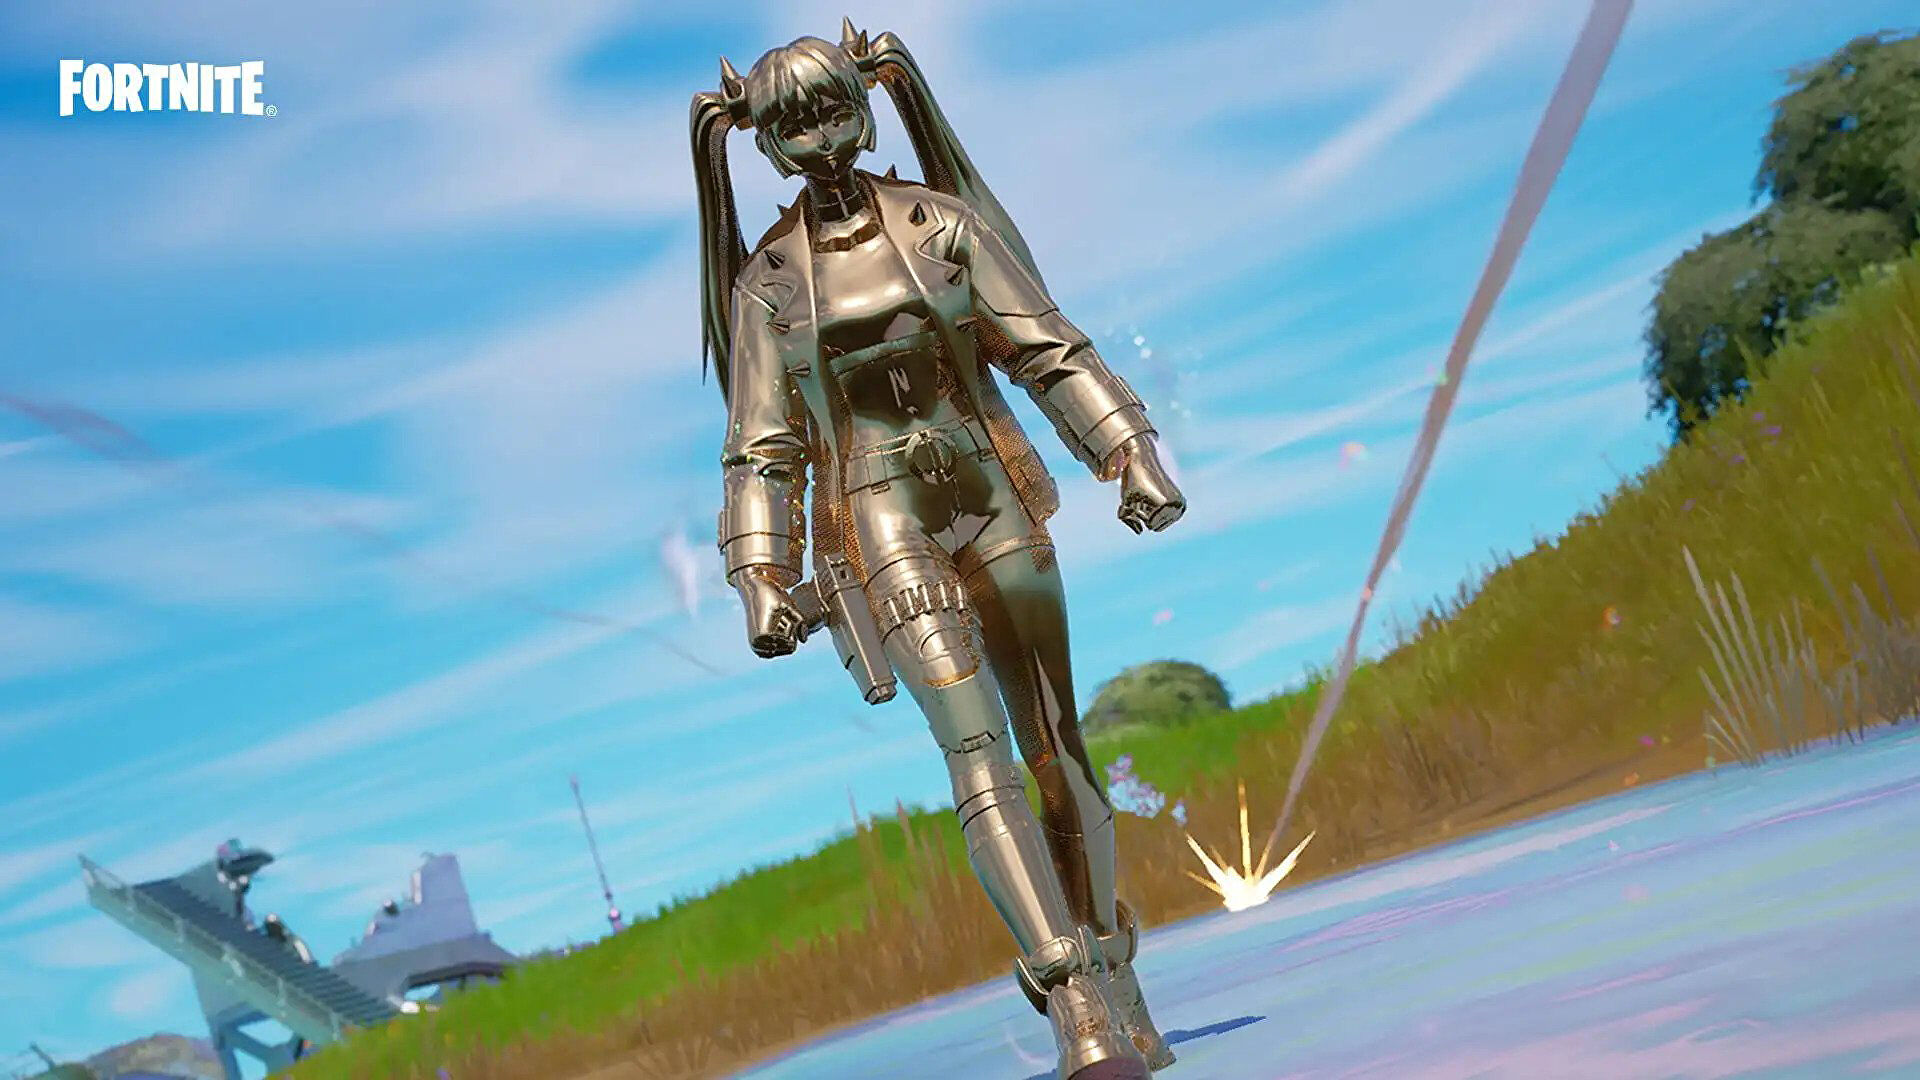 Fortnite’s latest season embraces the chrome, adds in Brie Larson and Spider-Gwen